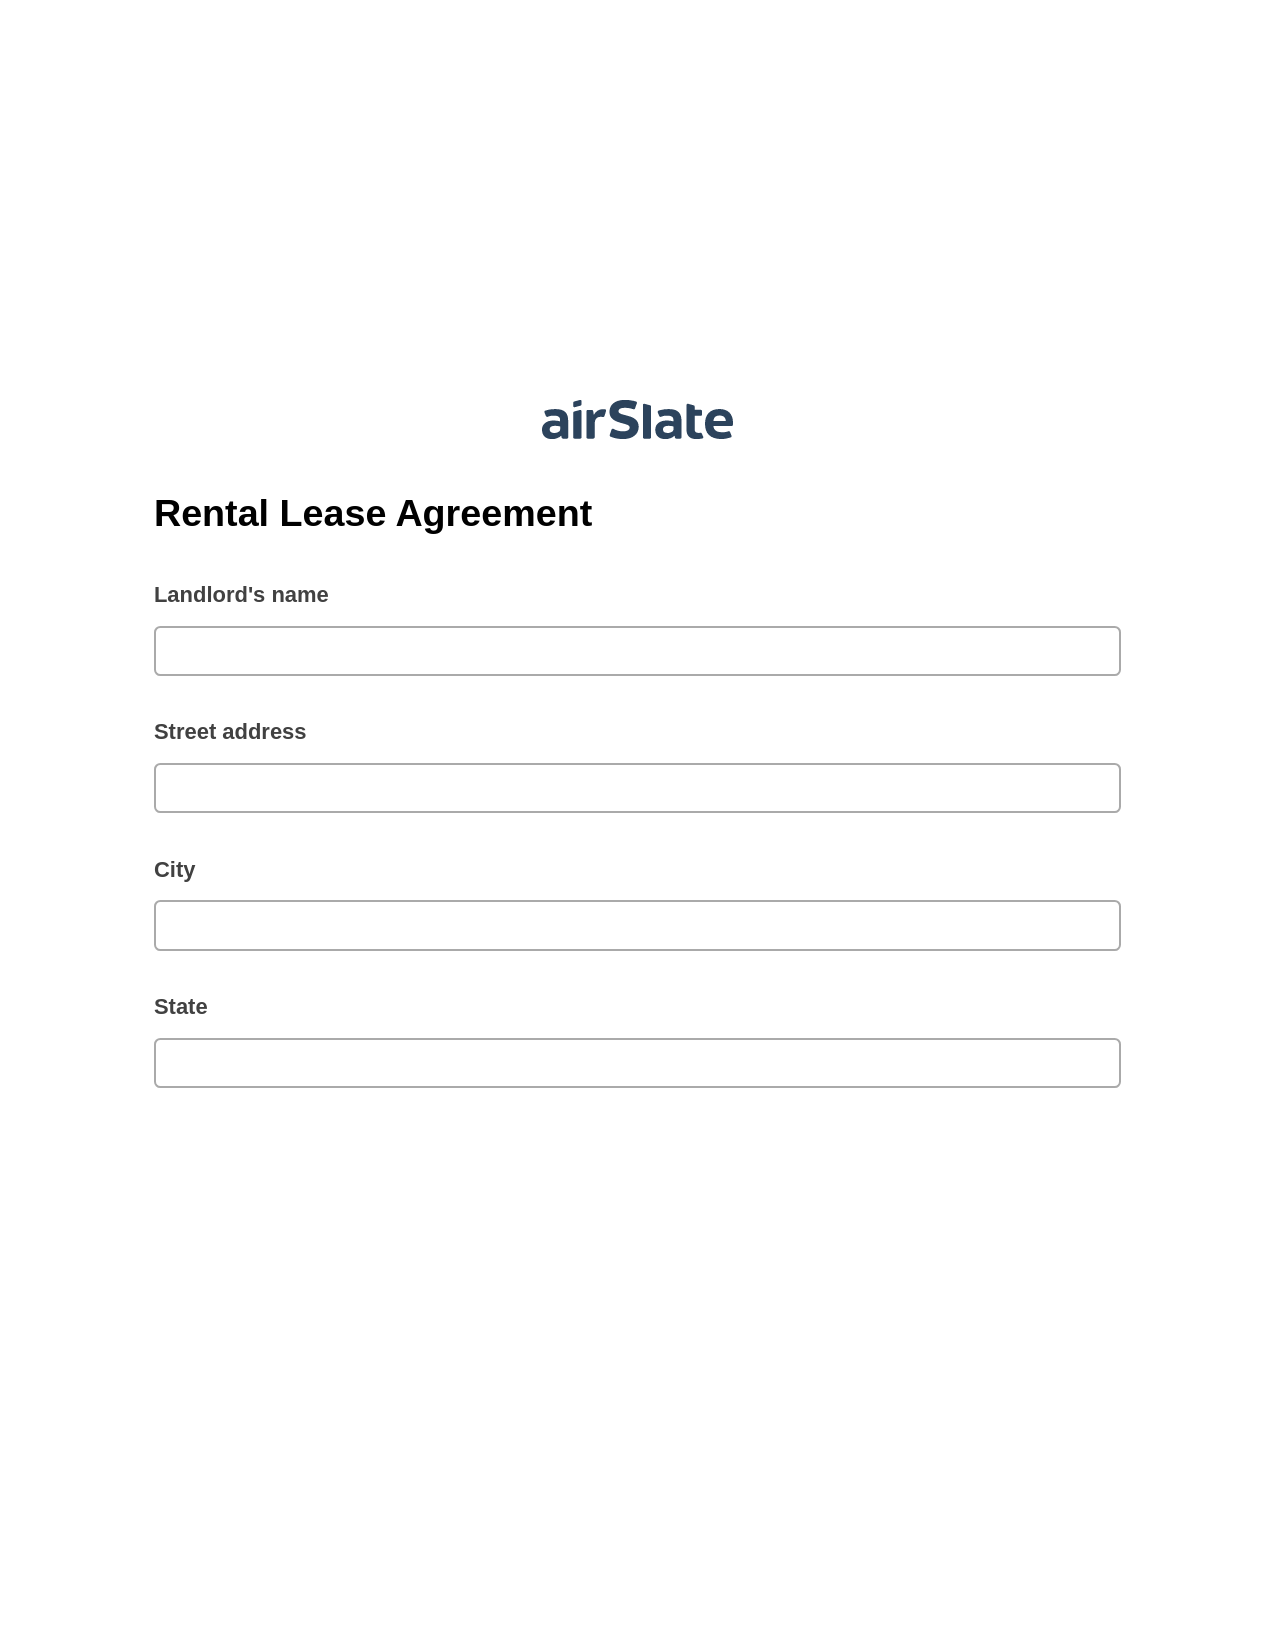 Multirole Rental Lease Agreement Pre-fill from Google Sheets Bot, Unassign Role Bot, Archive to SharePoint Folder Bot